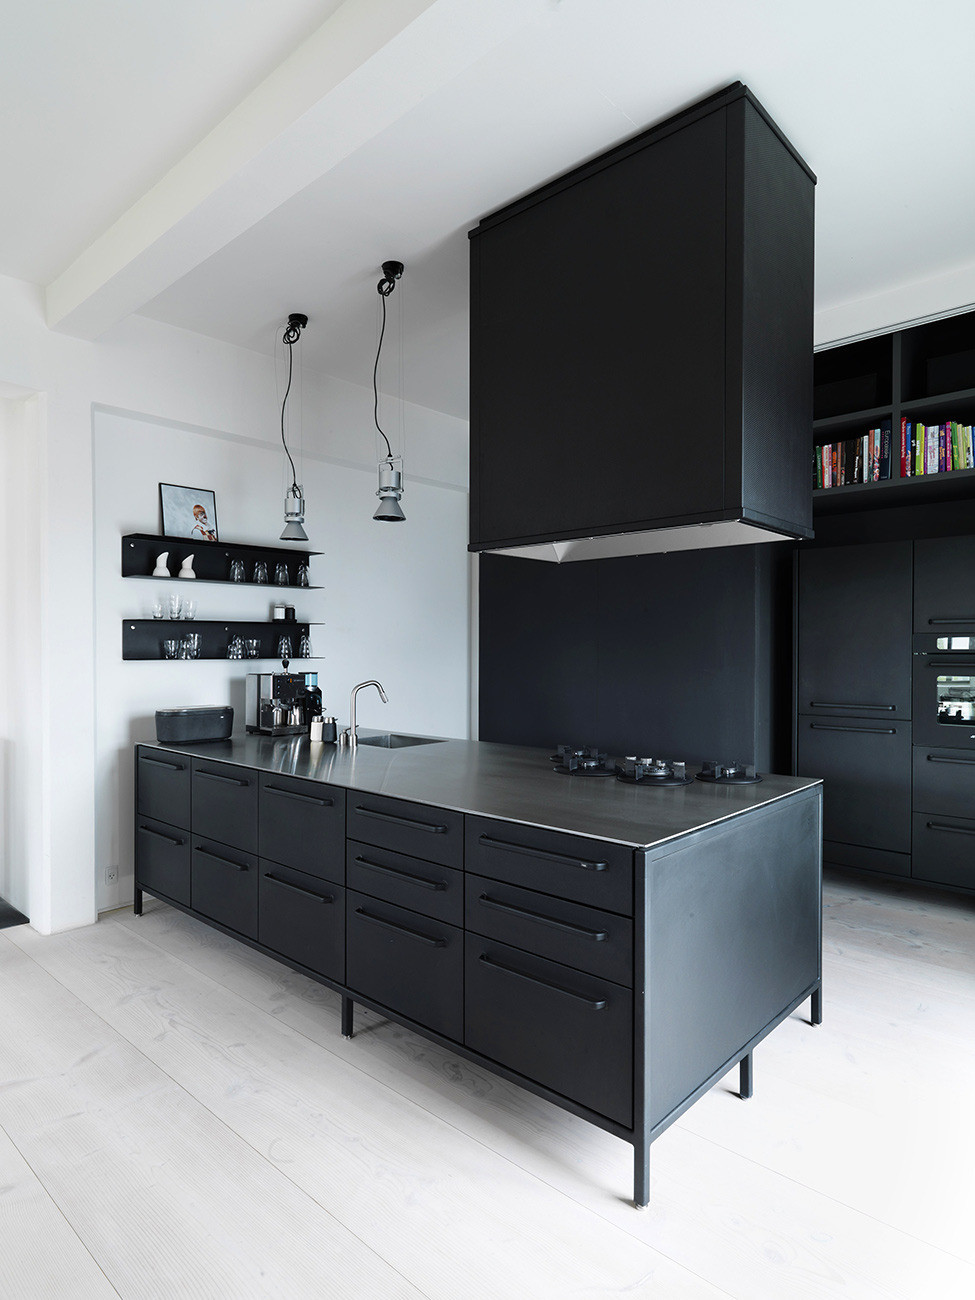 even a kitchen island with a cooking hood above it are all black